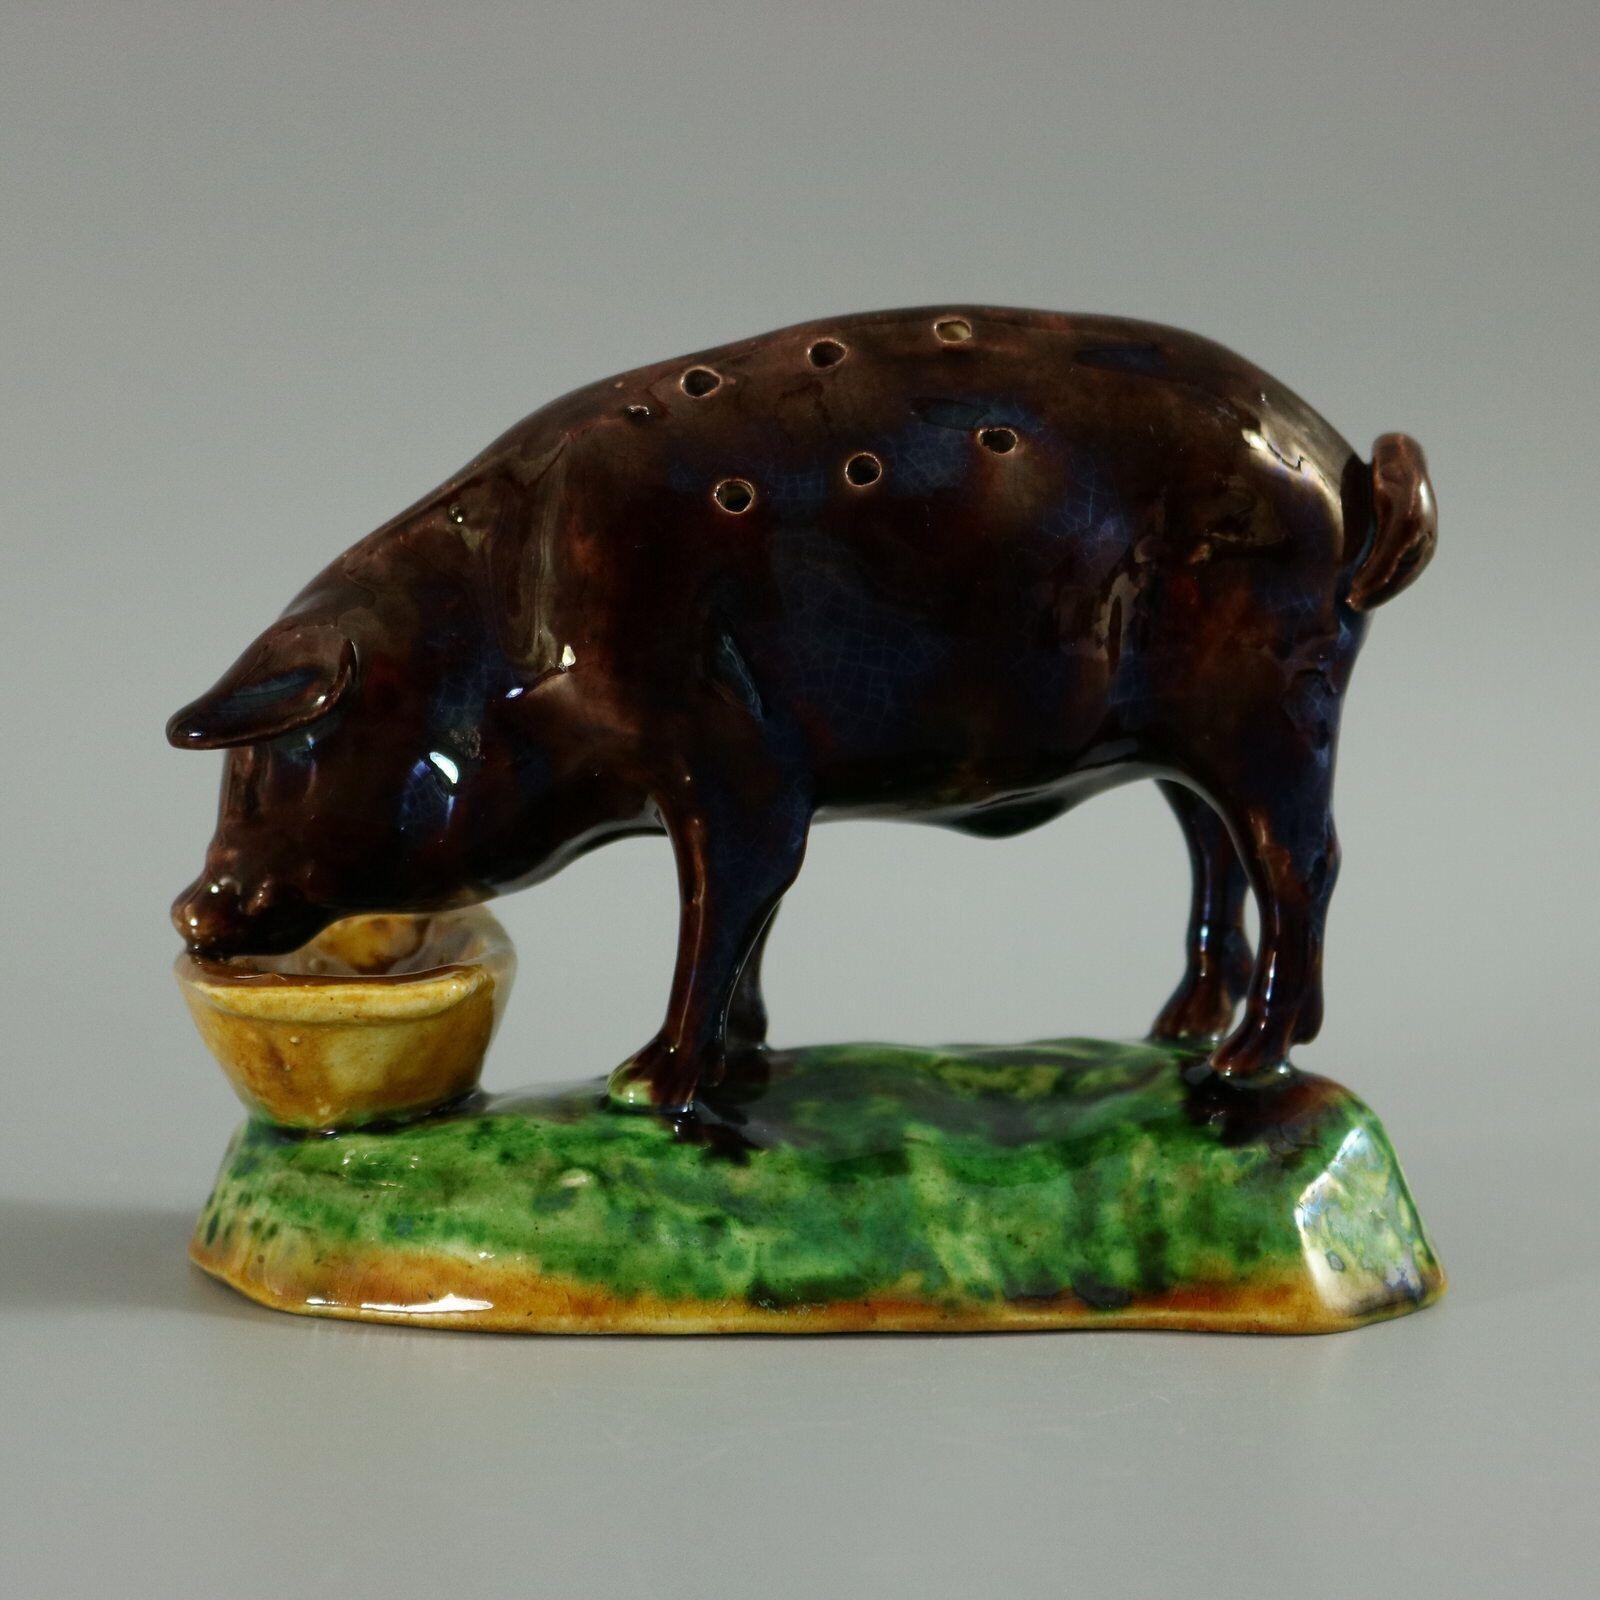 Elias Portuguese Palissy Majolica toothpick holder which features a pig, feeding from a trough. Colouration: brown, green, ochre, are predominant. The piece bears maker's marks for the Elias pottery.